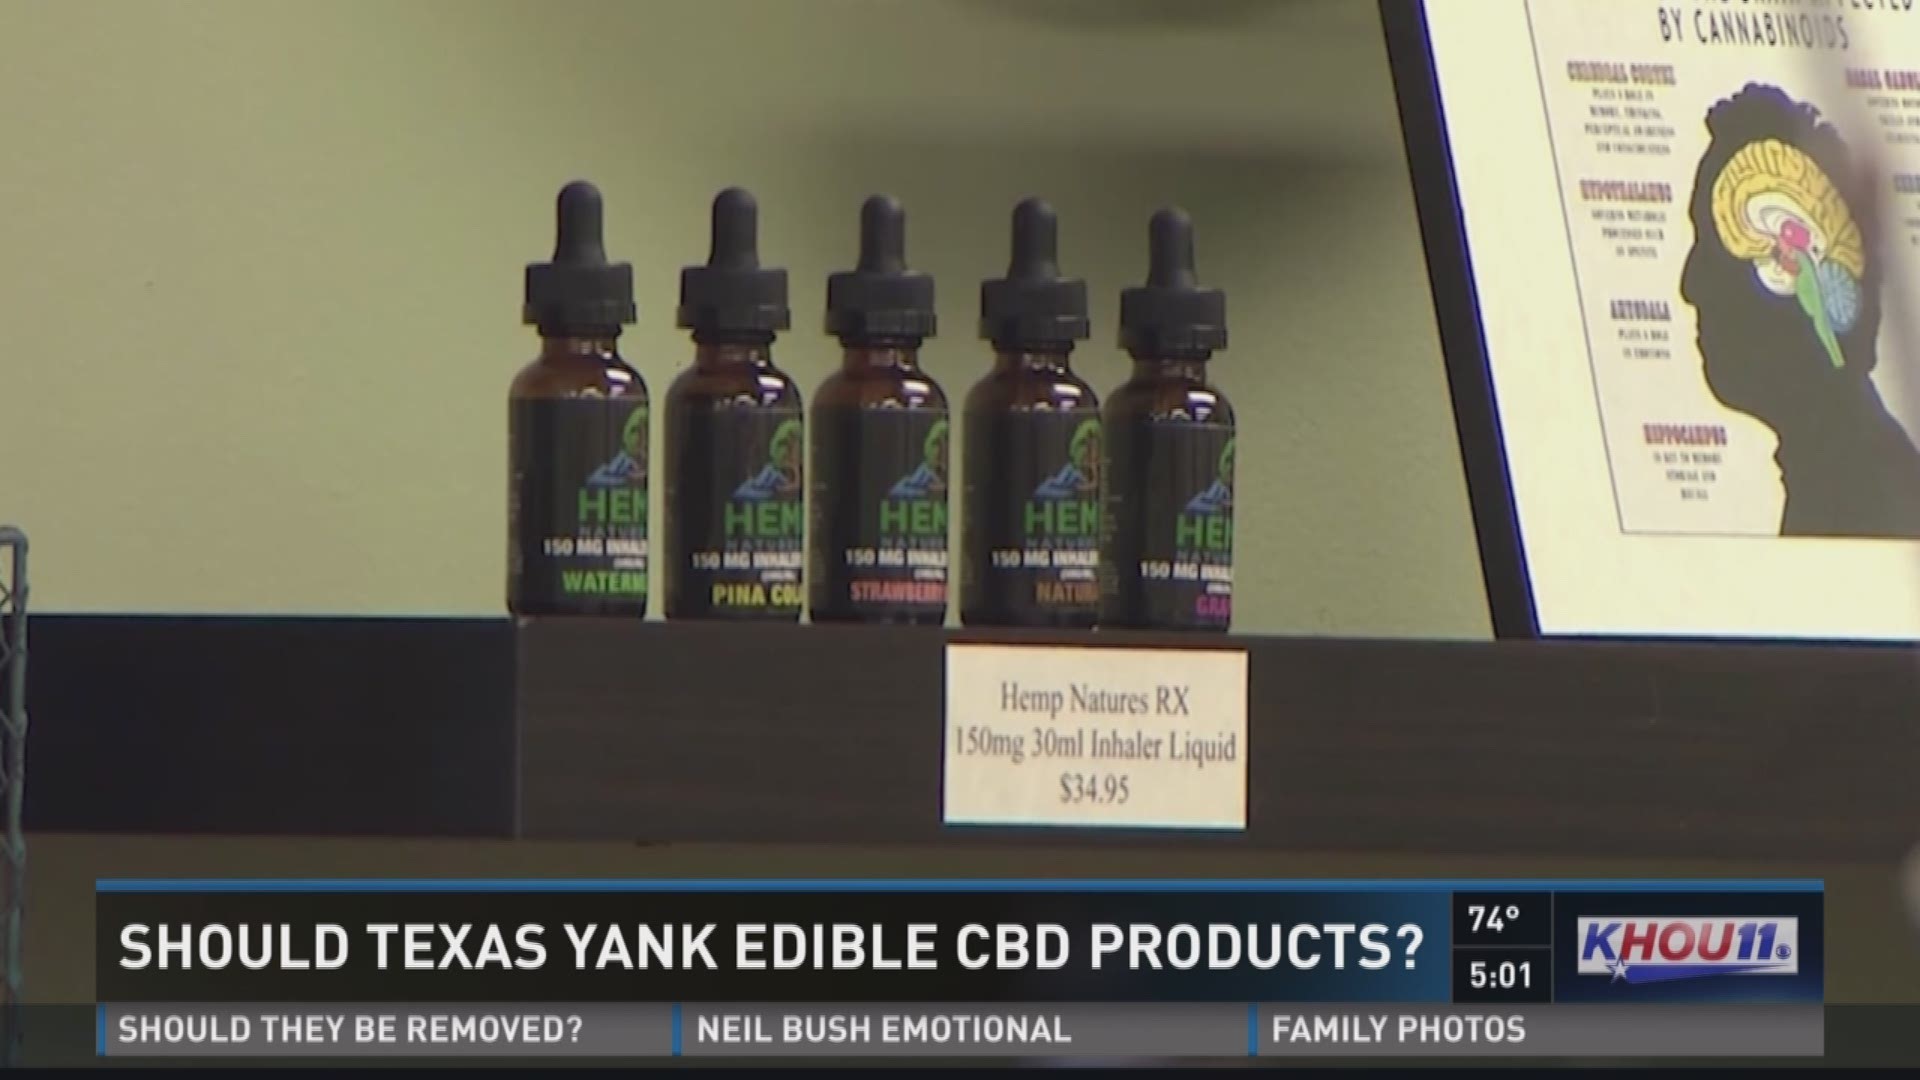 Monday is the final day CBD advocates can write to the state to try to save their oils.